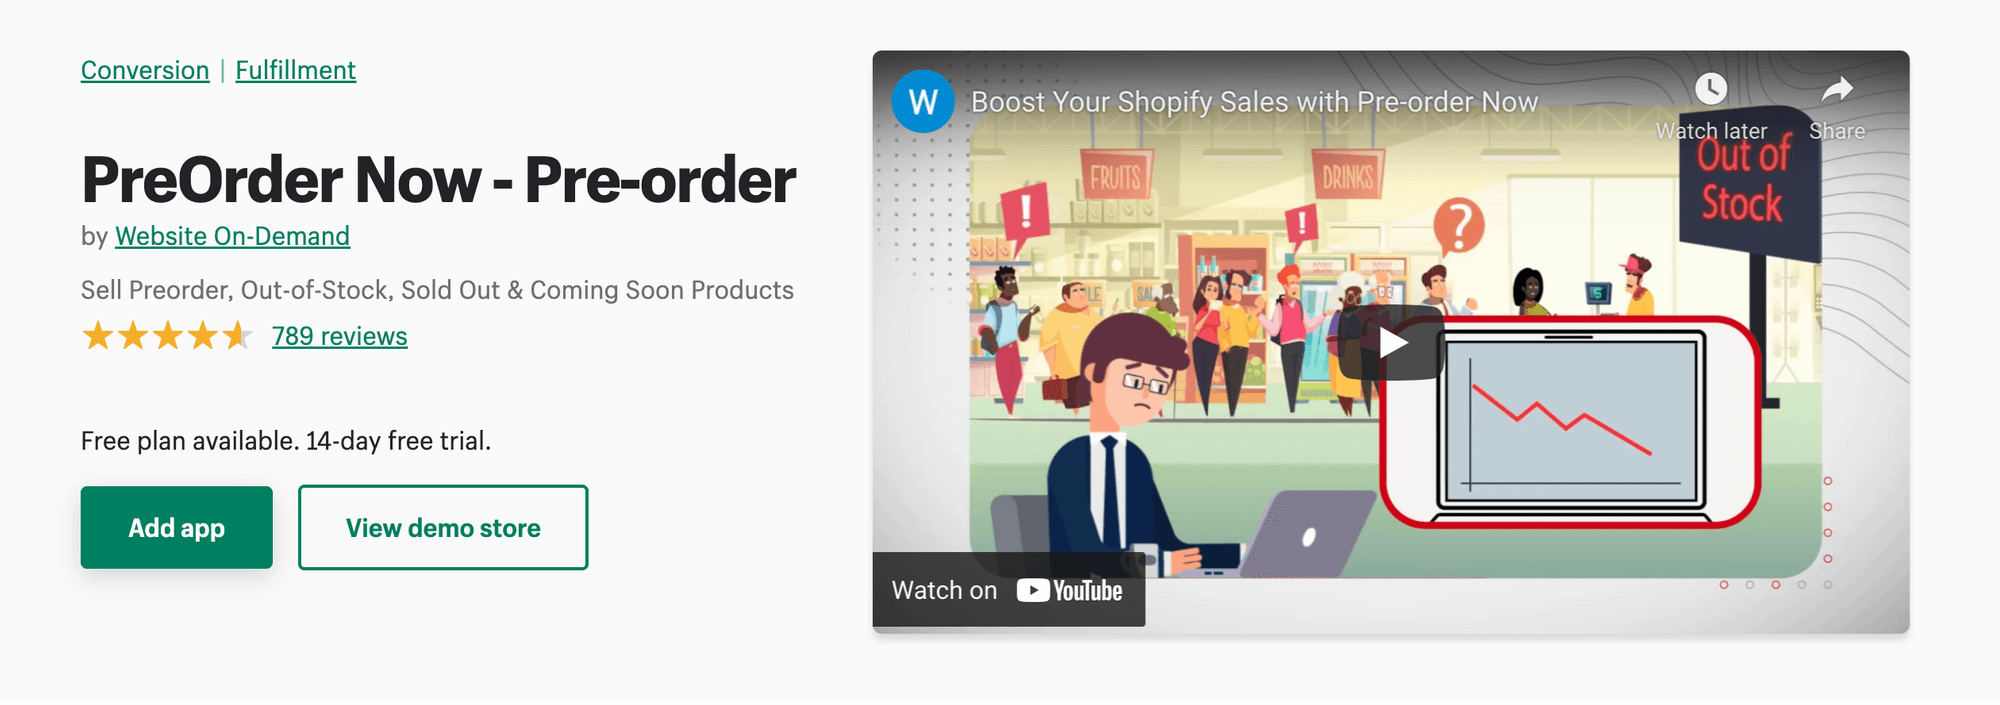 Shopify App Store- PreOrder Now